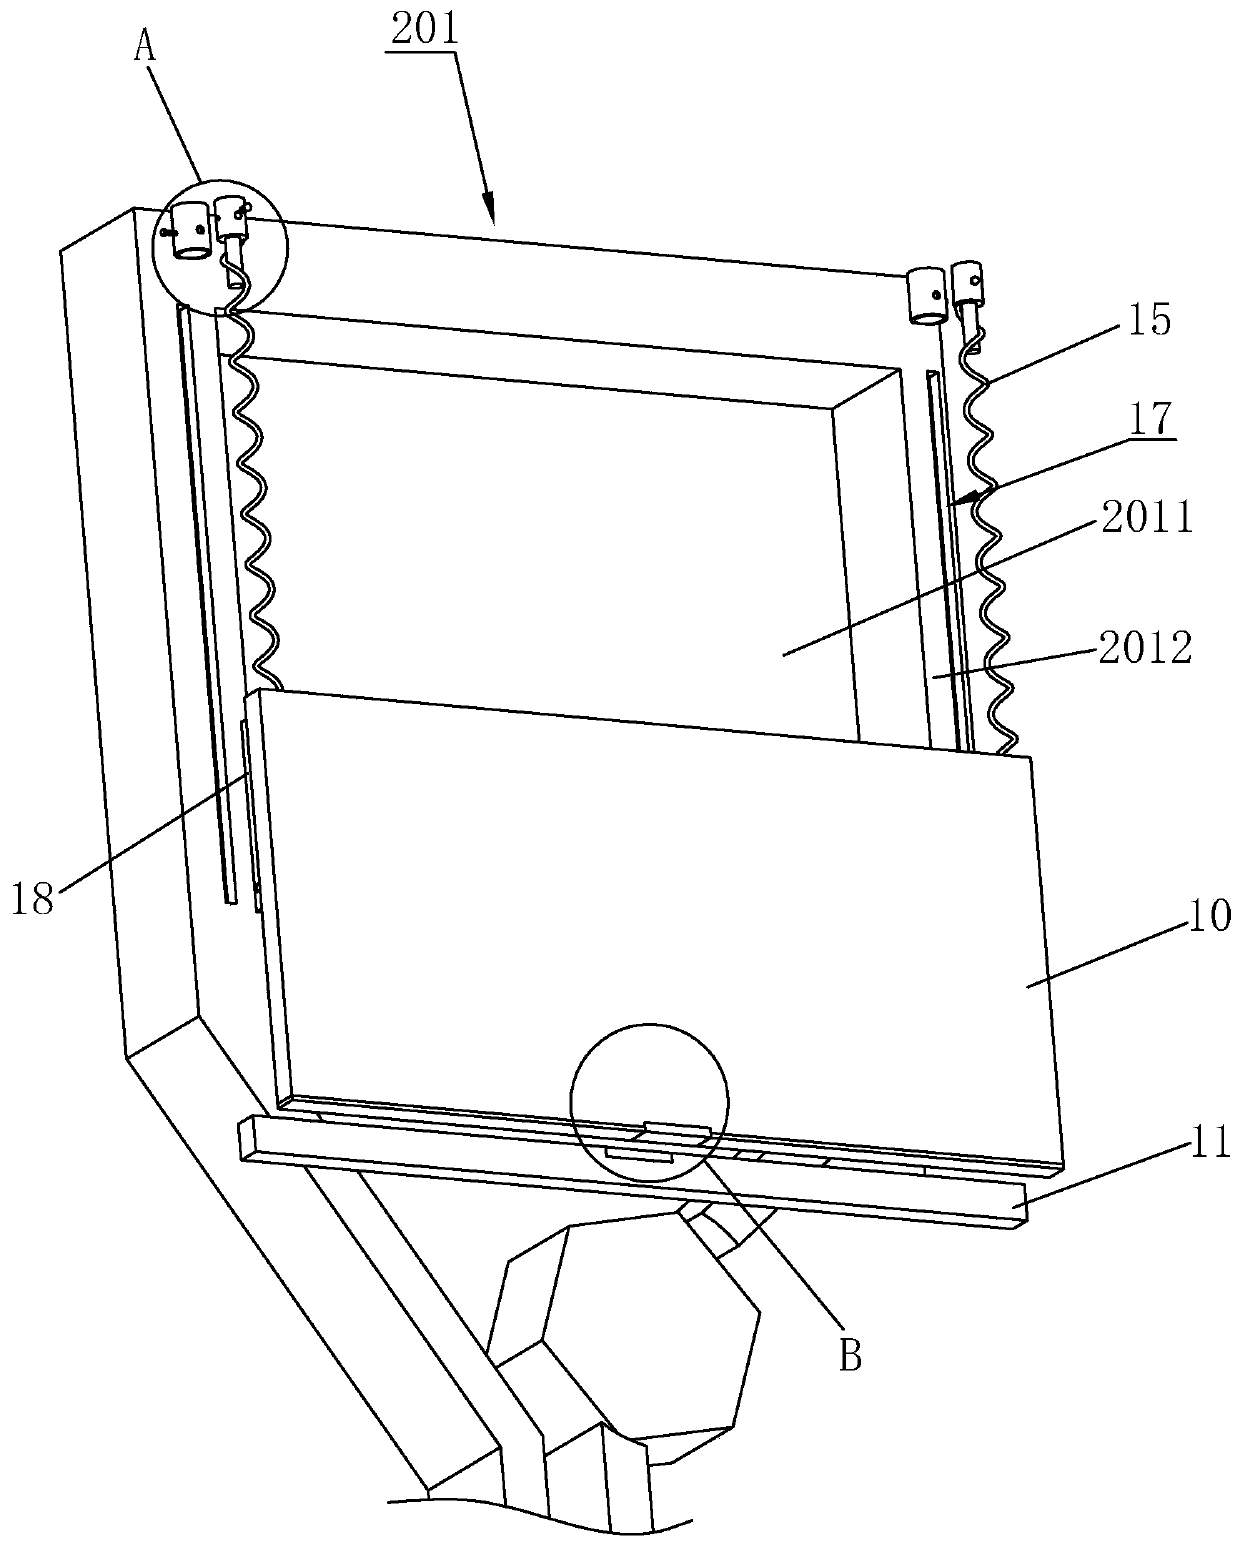 Battery barley paper pasting device